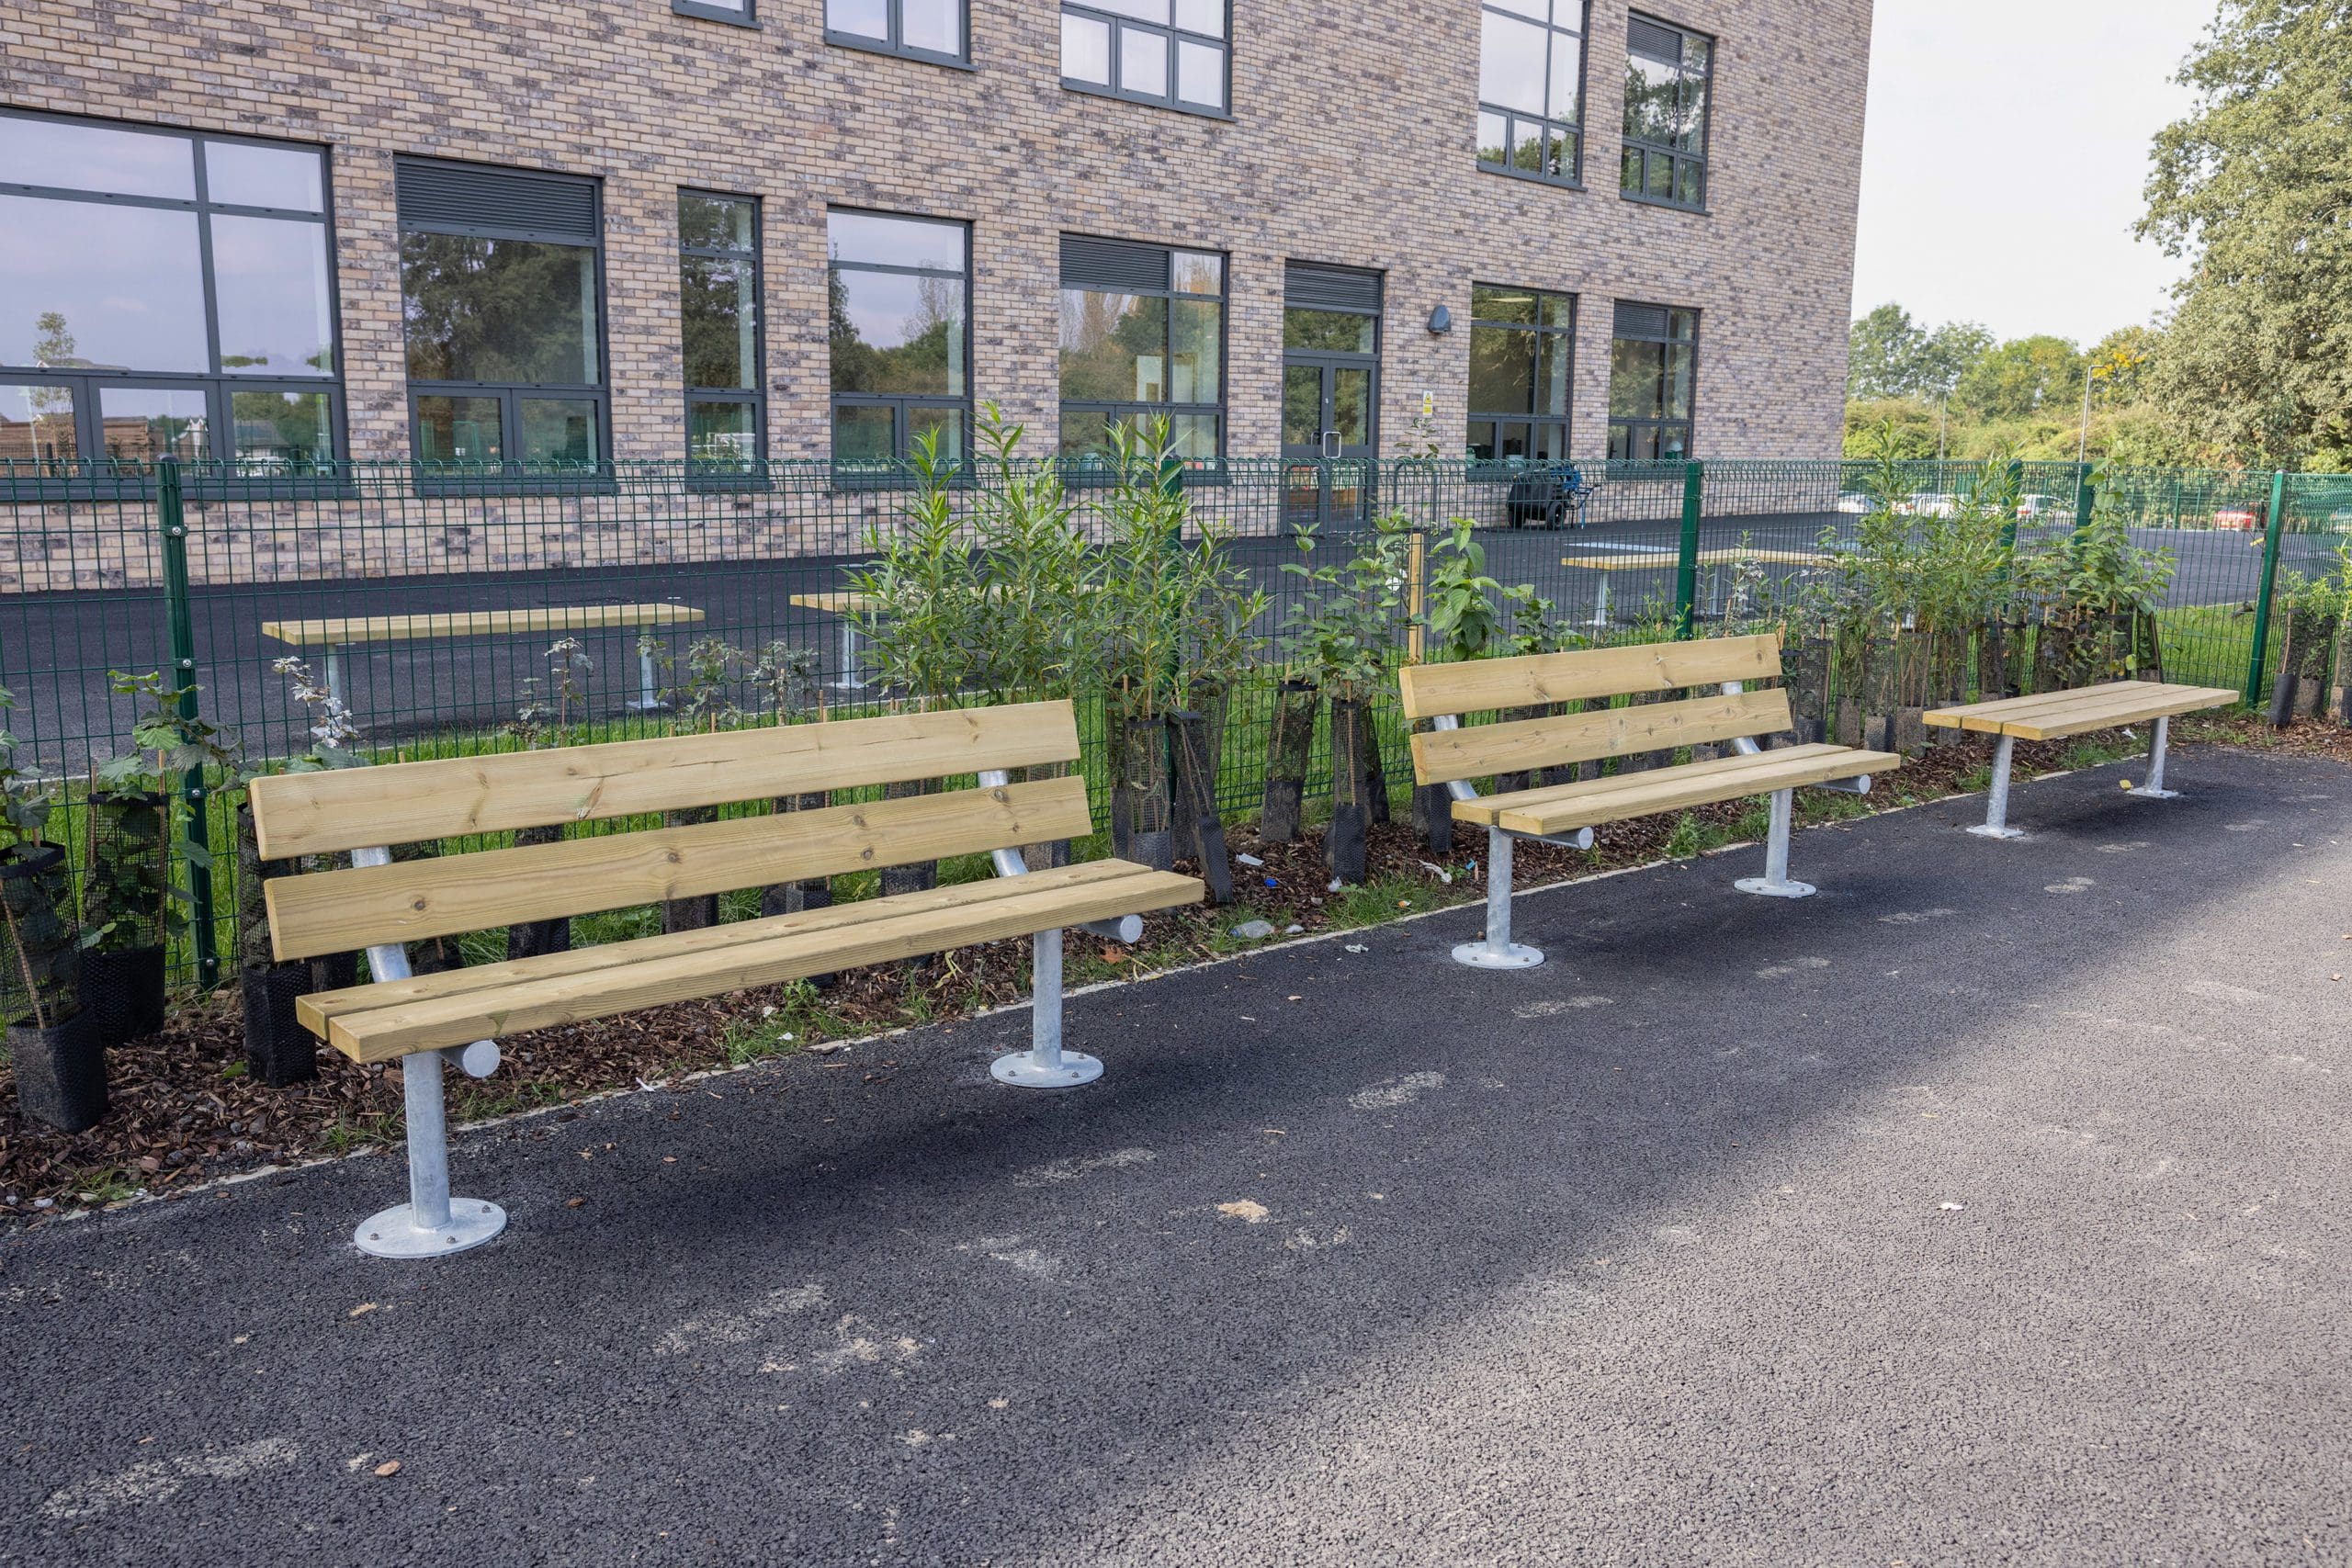 Outdoor rectangular wooden benches with metal legs and curved wooden backs